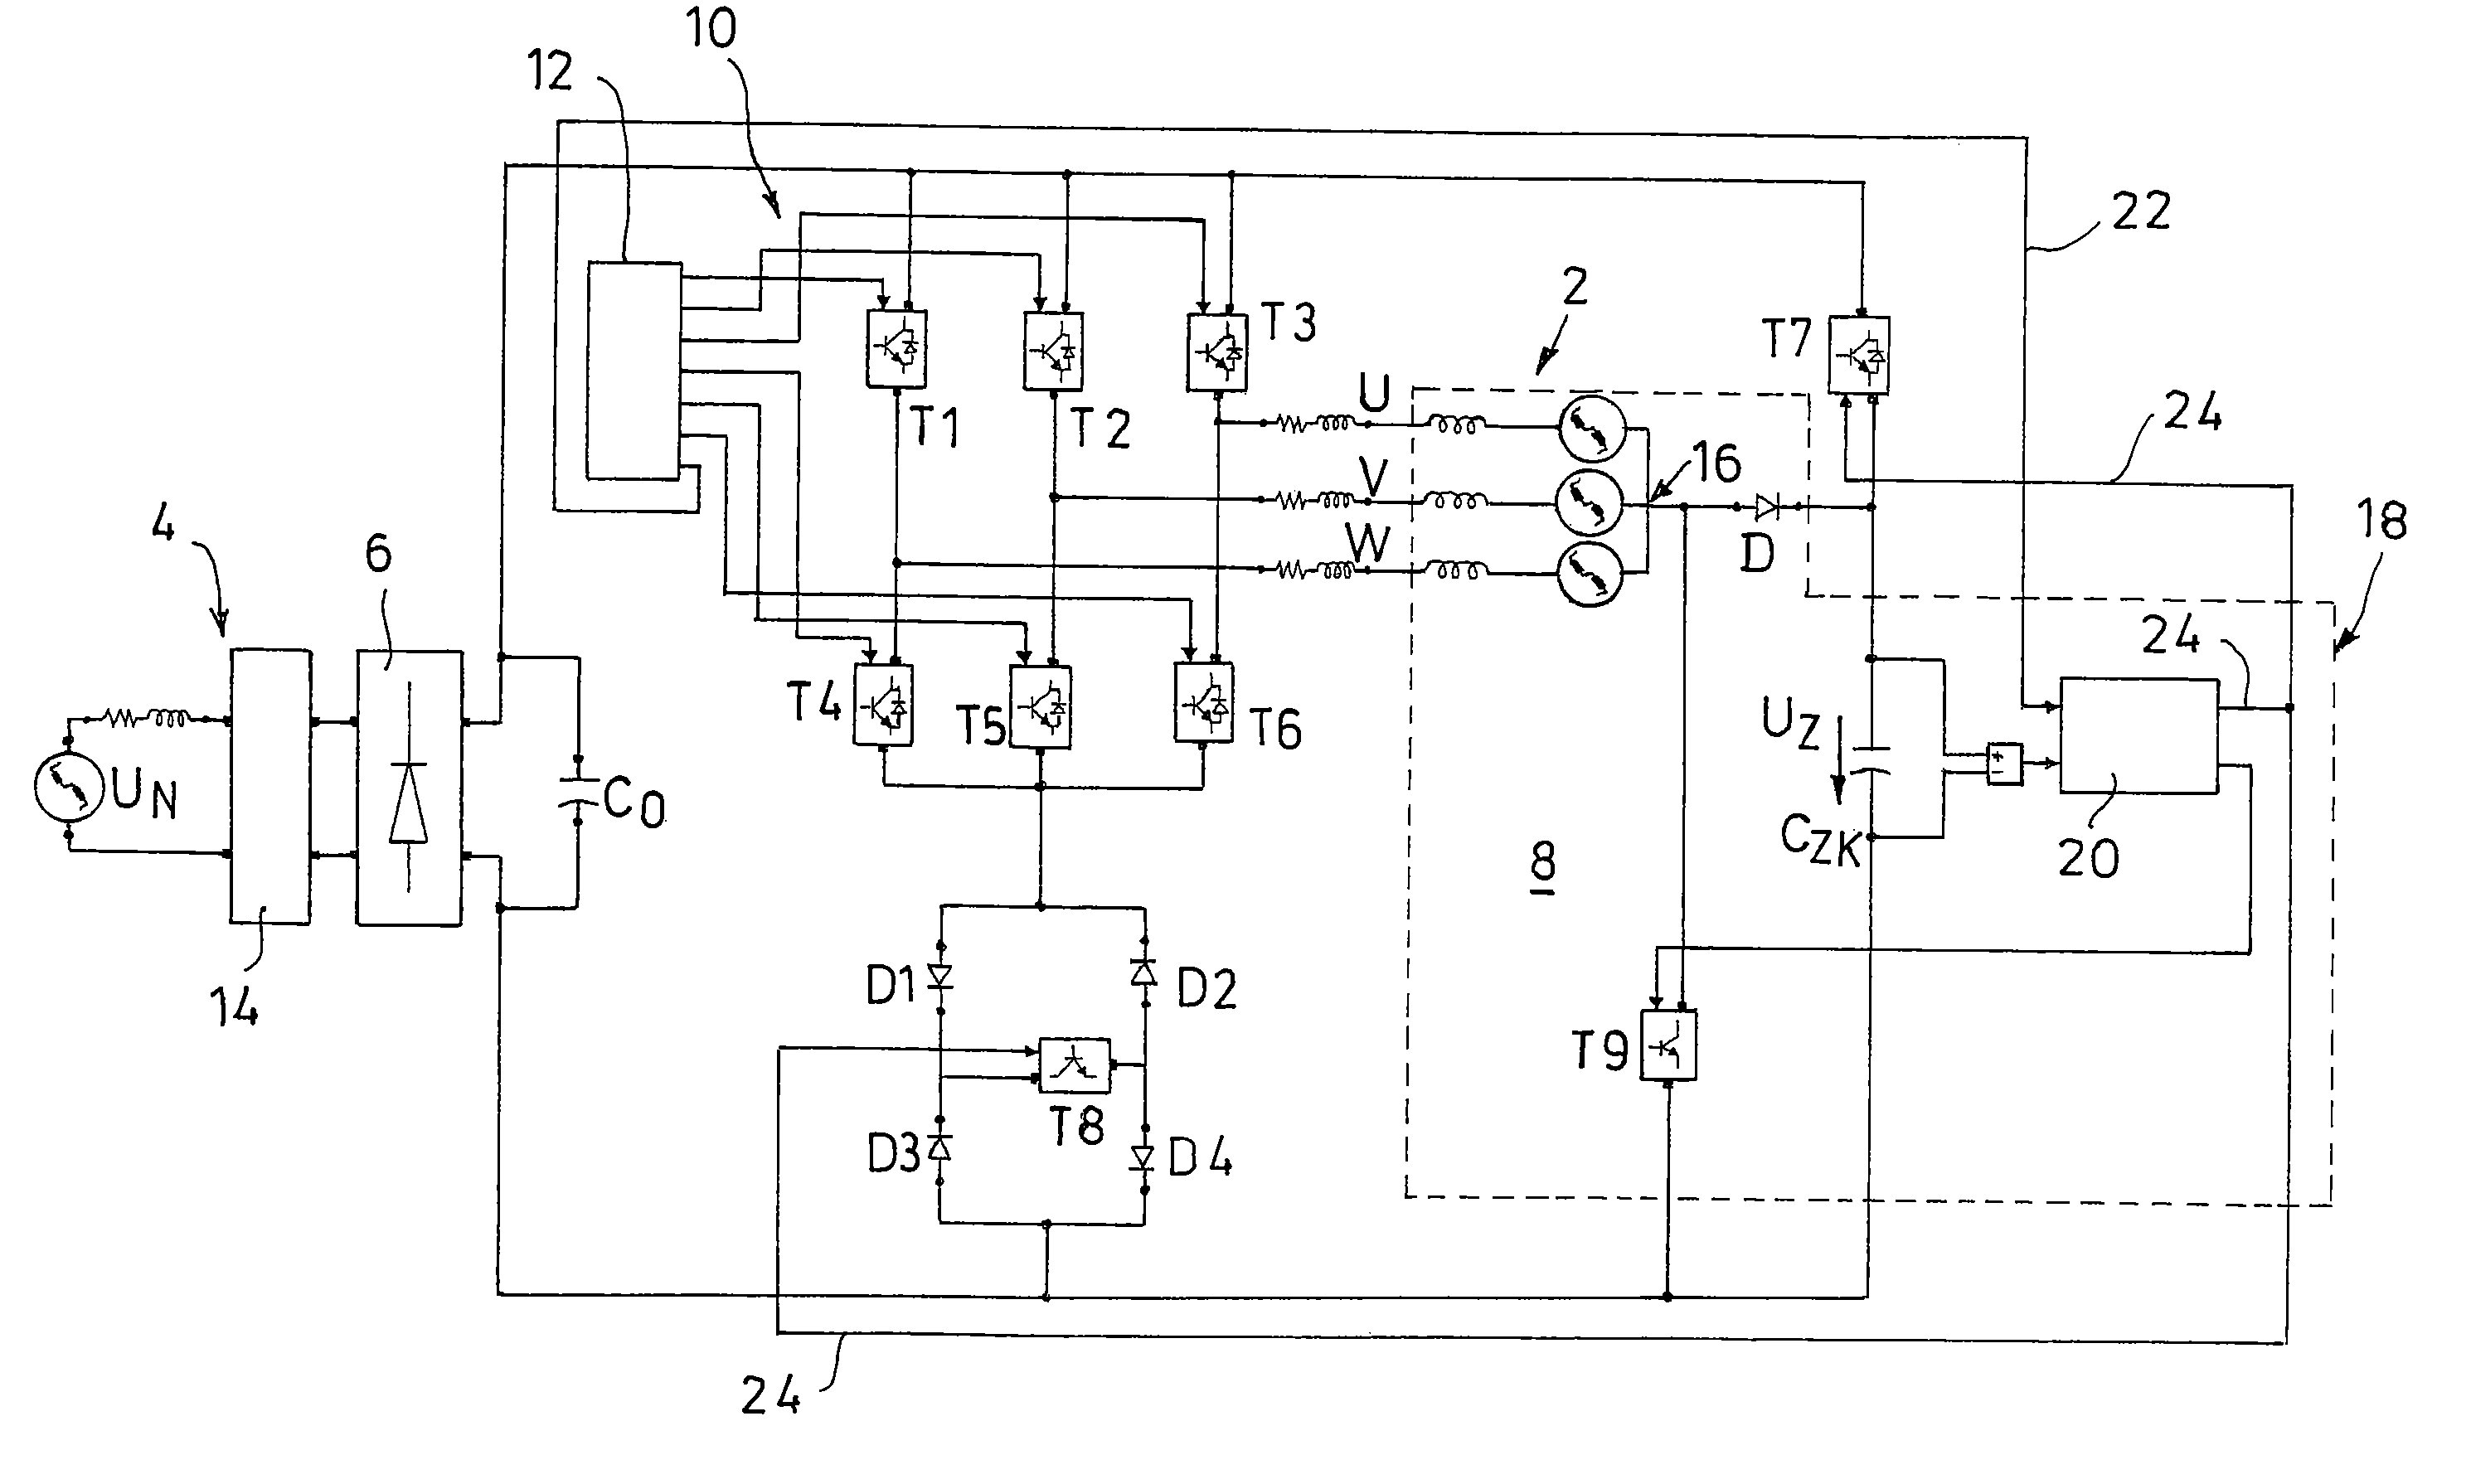 Procedures and control system to control a brushless electric motor